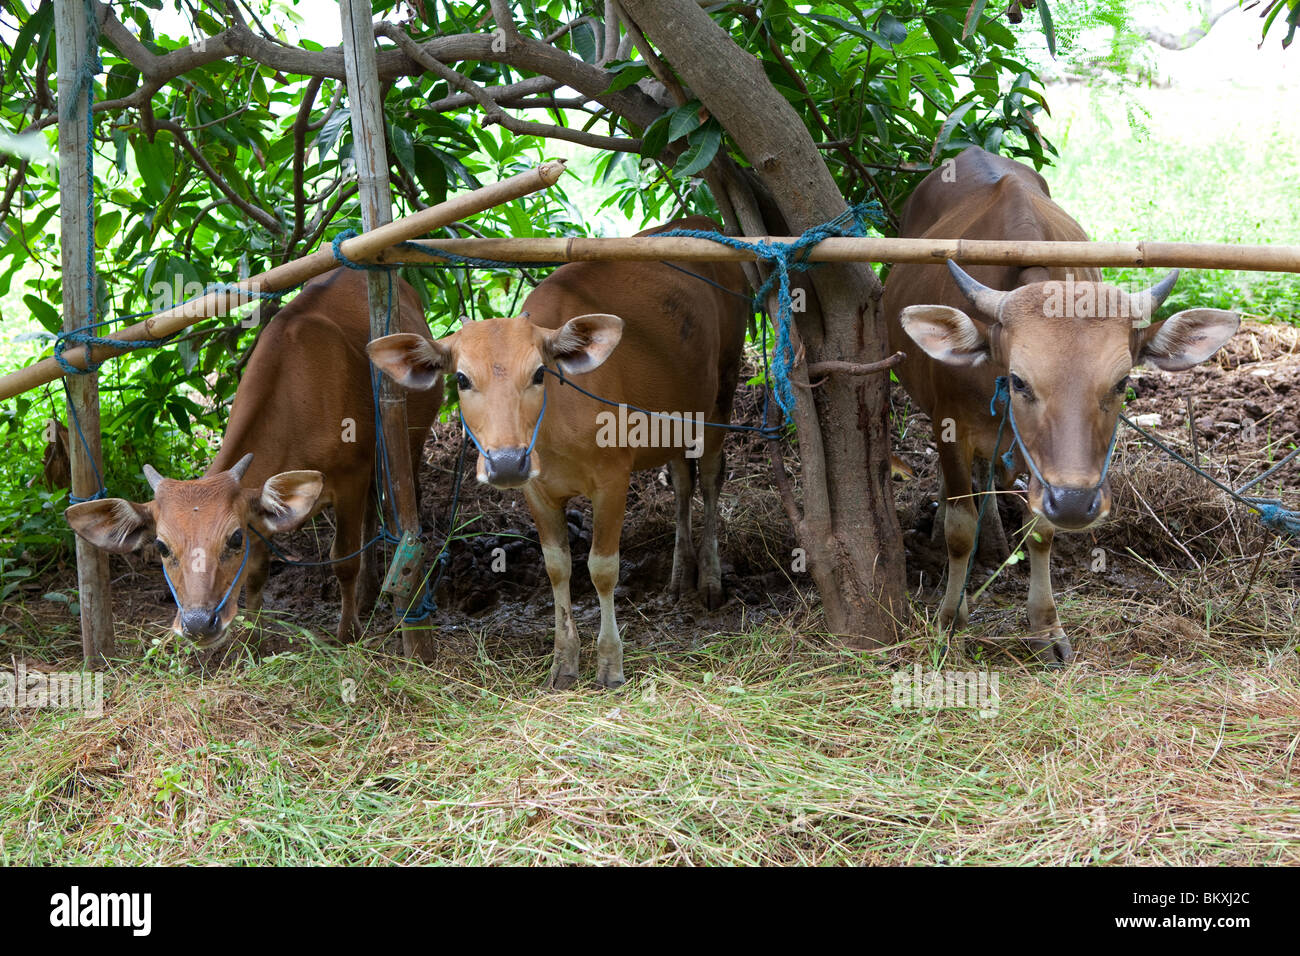 Cows at Bali, Indonesia Stock Photo